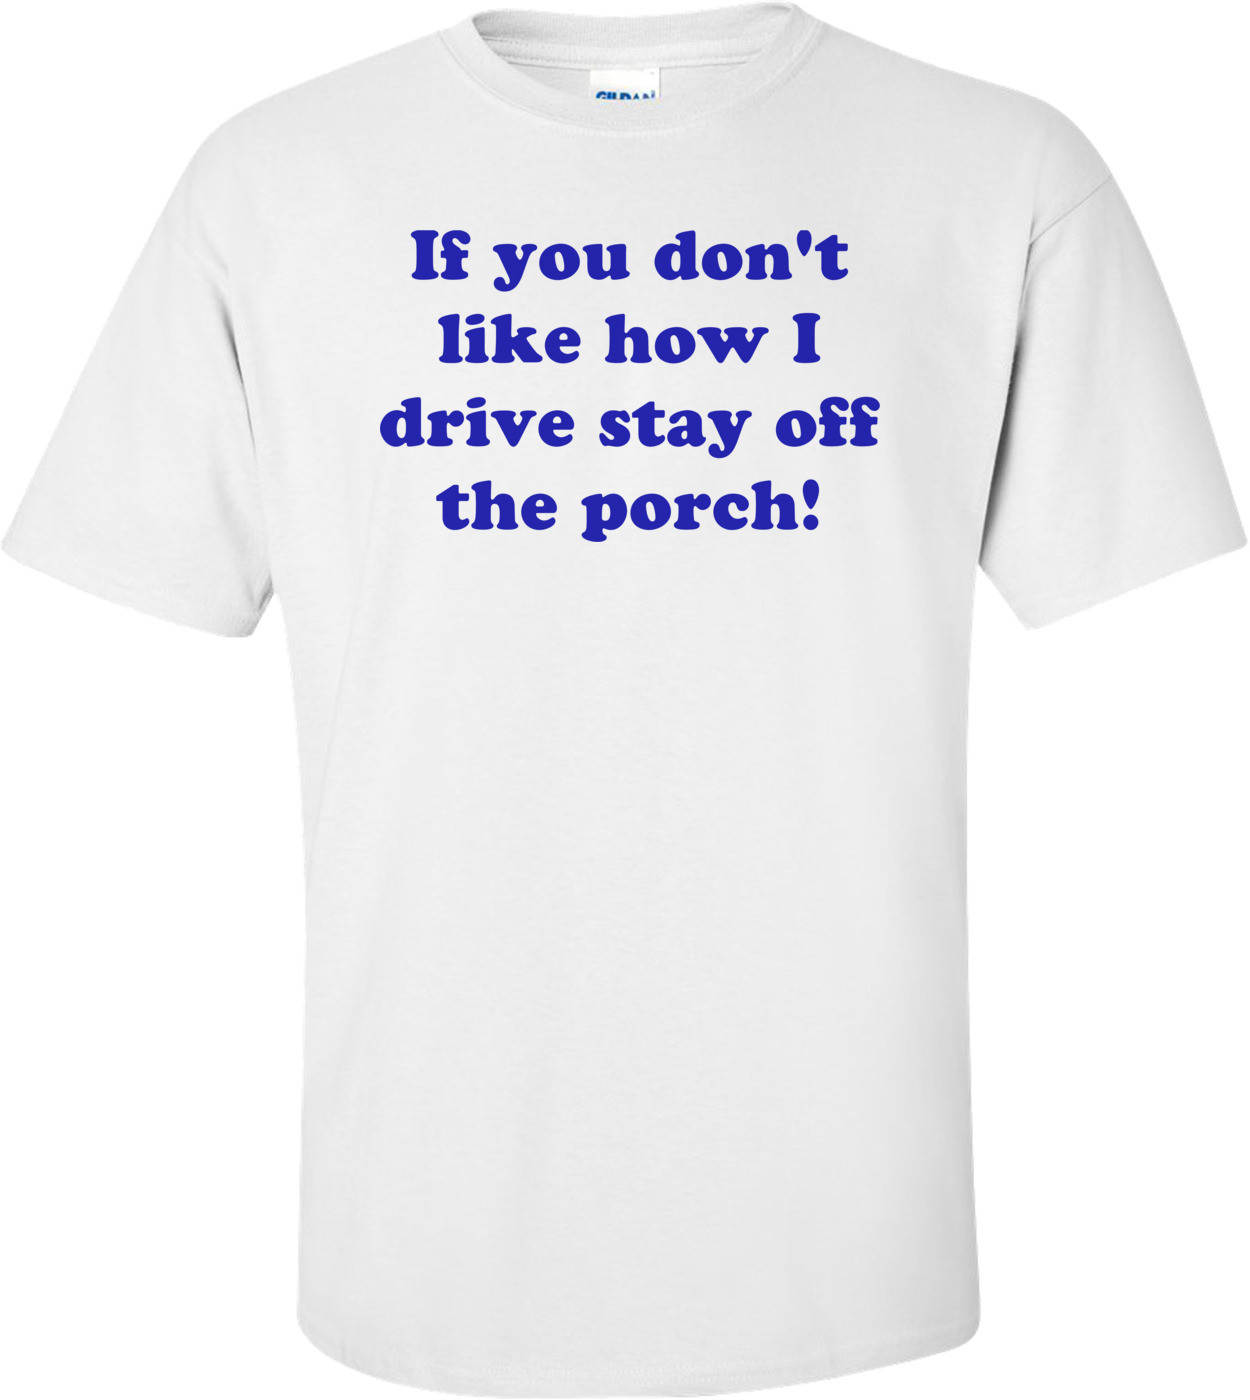 If you don't like how I drive stay off the porch! Shirt